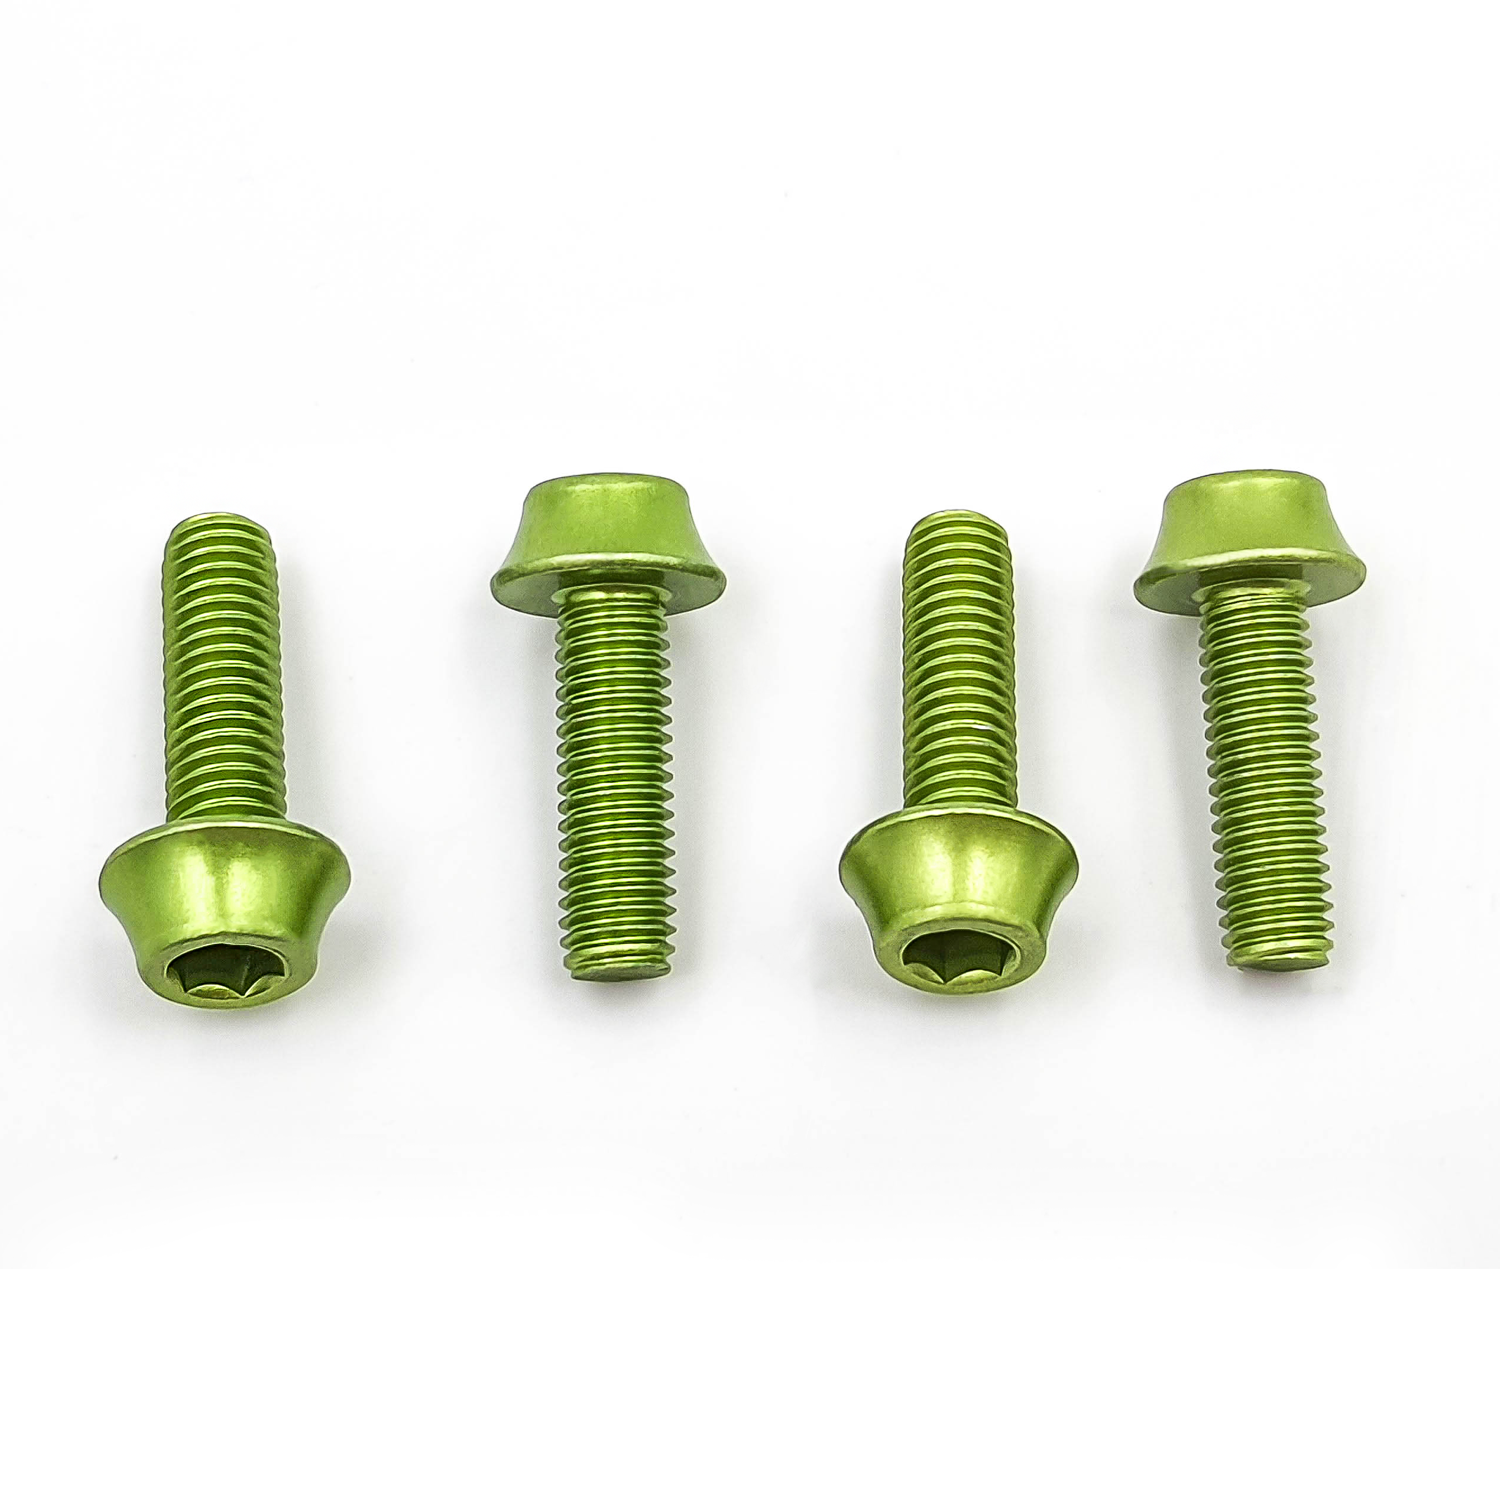 ONIPAX Aluminum Water Bottle Cage Bolts M5 x 16mm Pack of 4 pcs